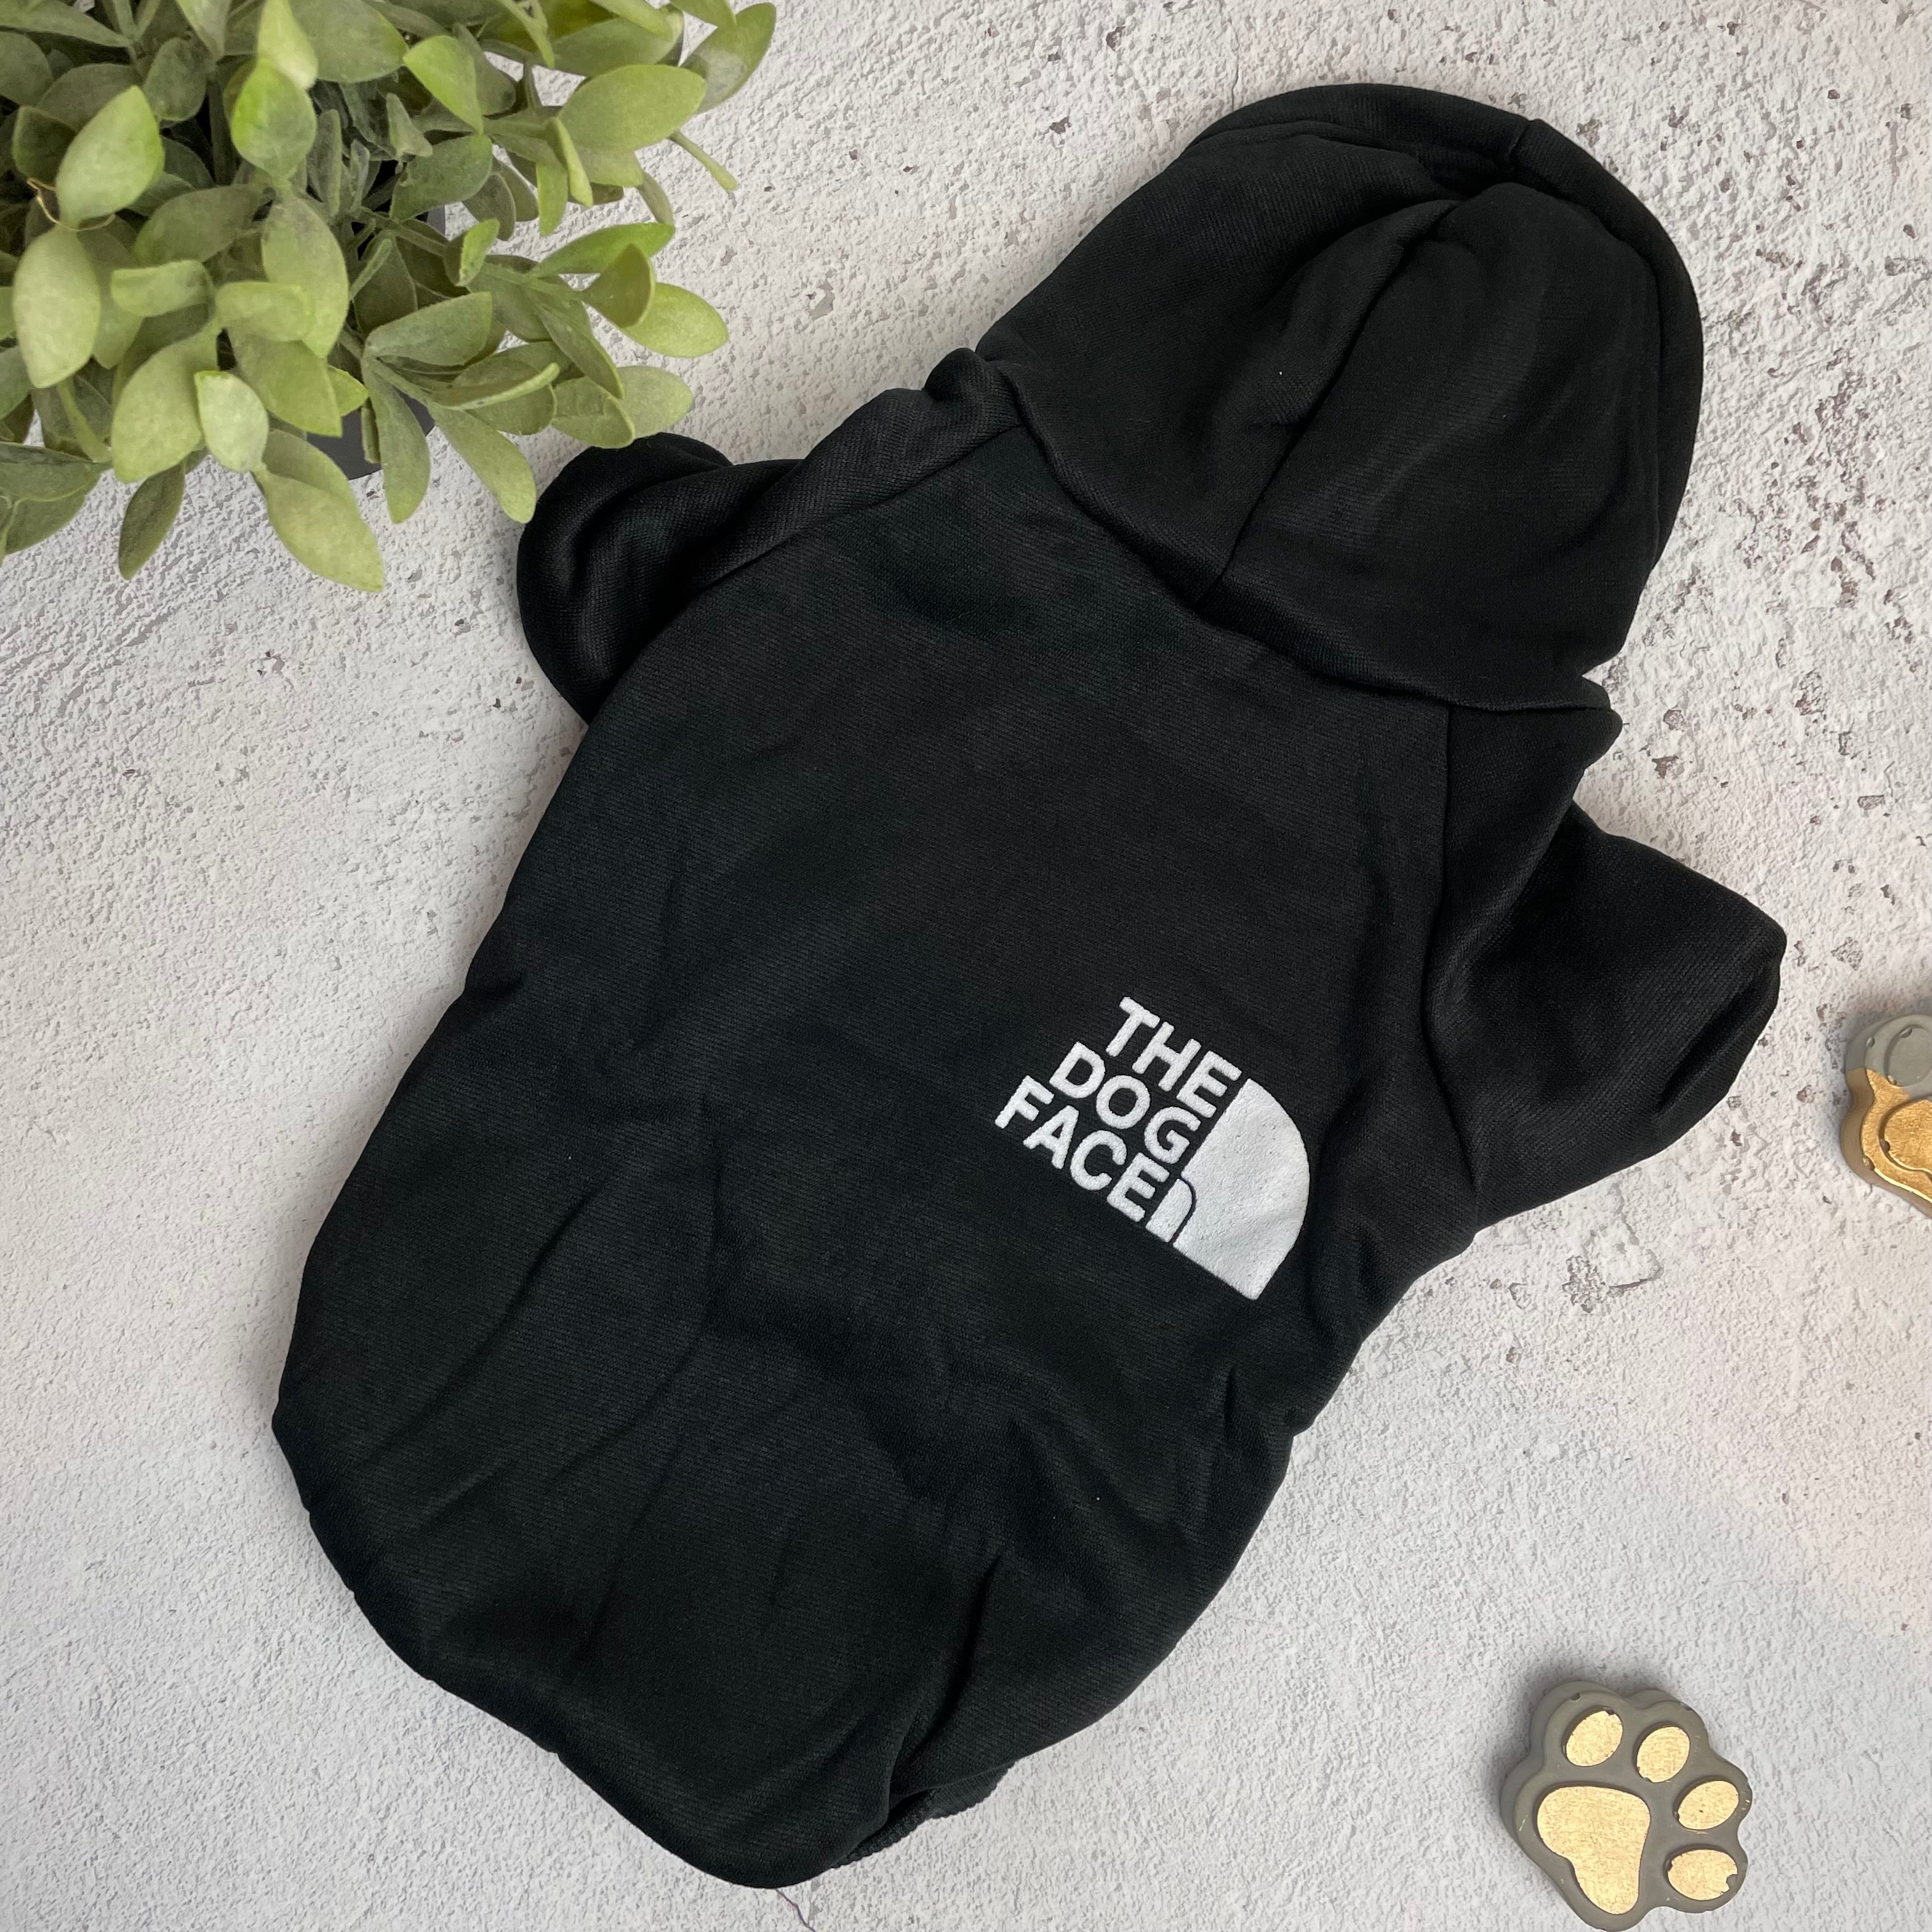 Black The Dog Face Hoodie